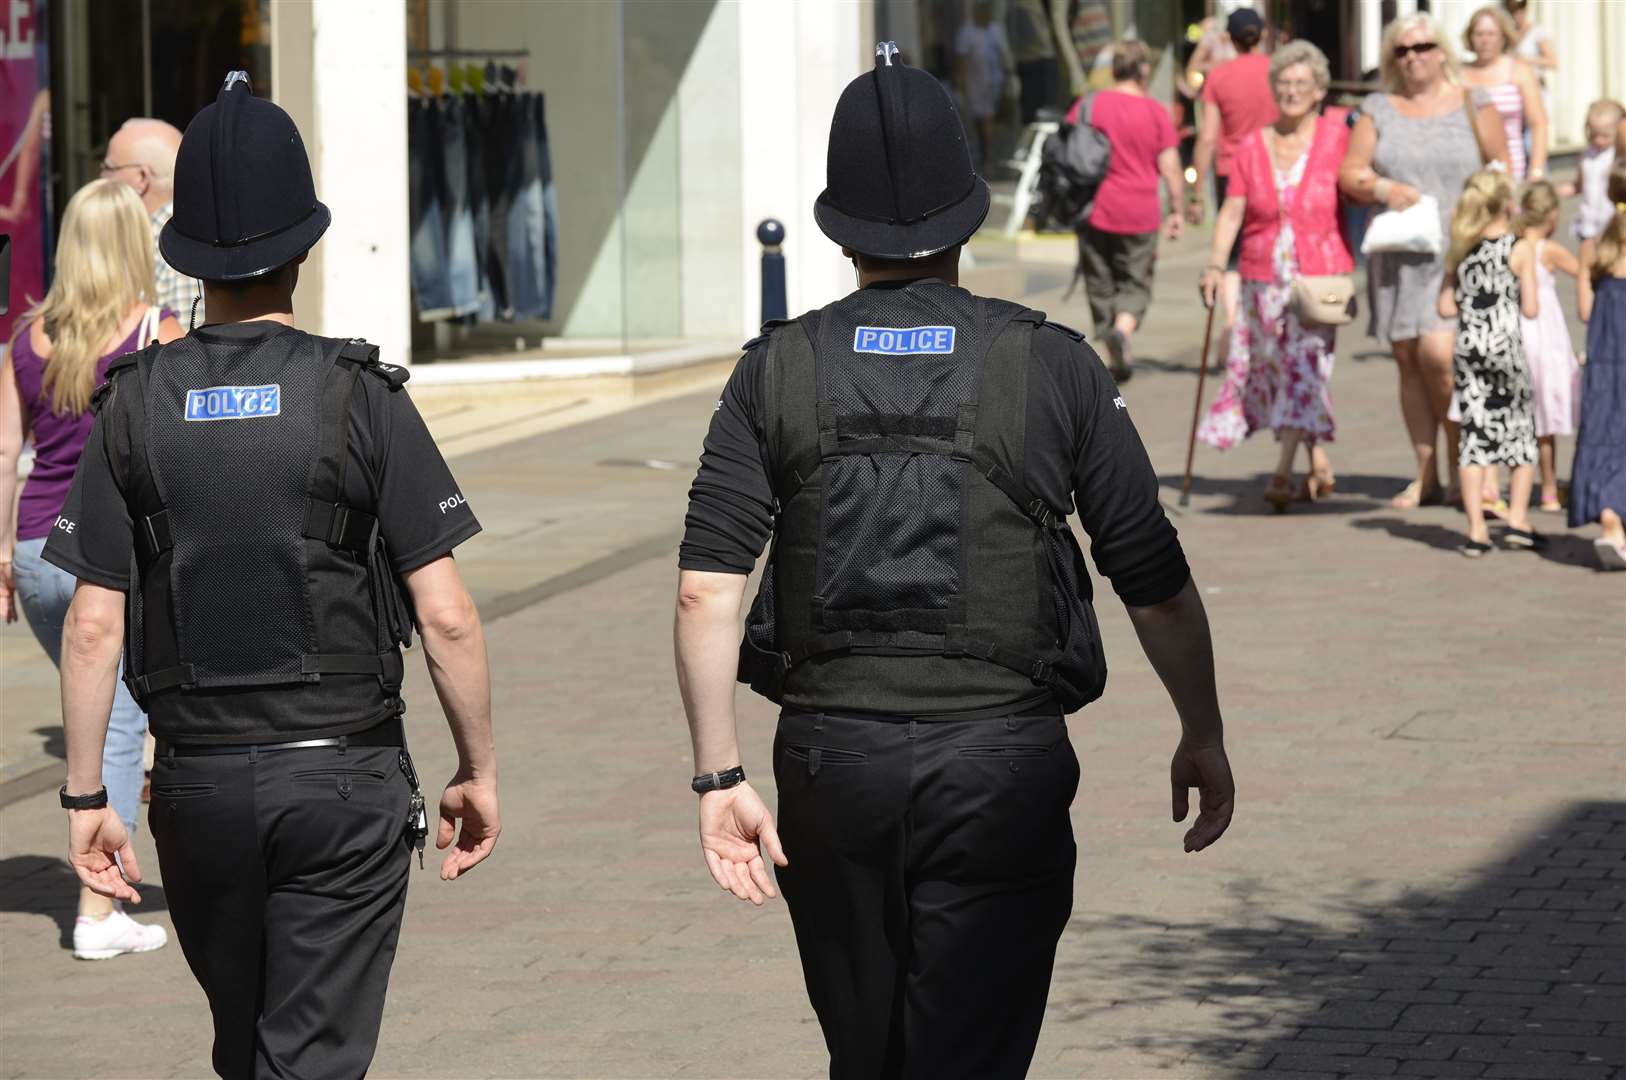 A new police task force has been launched in Maidstone. Picture: Martin Apps